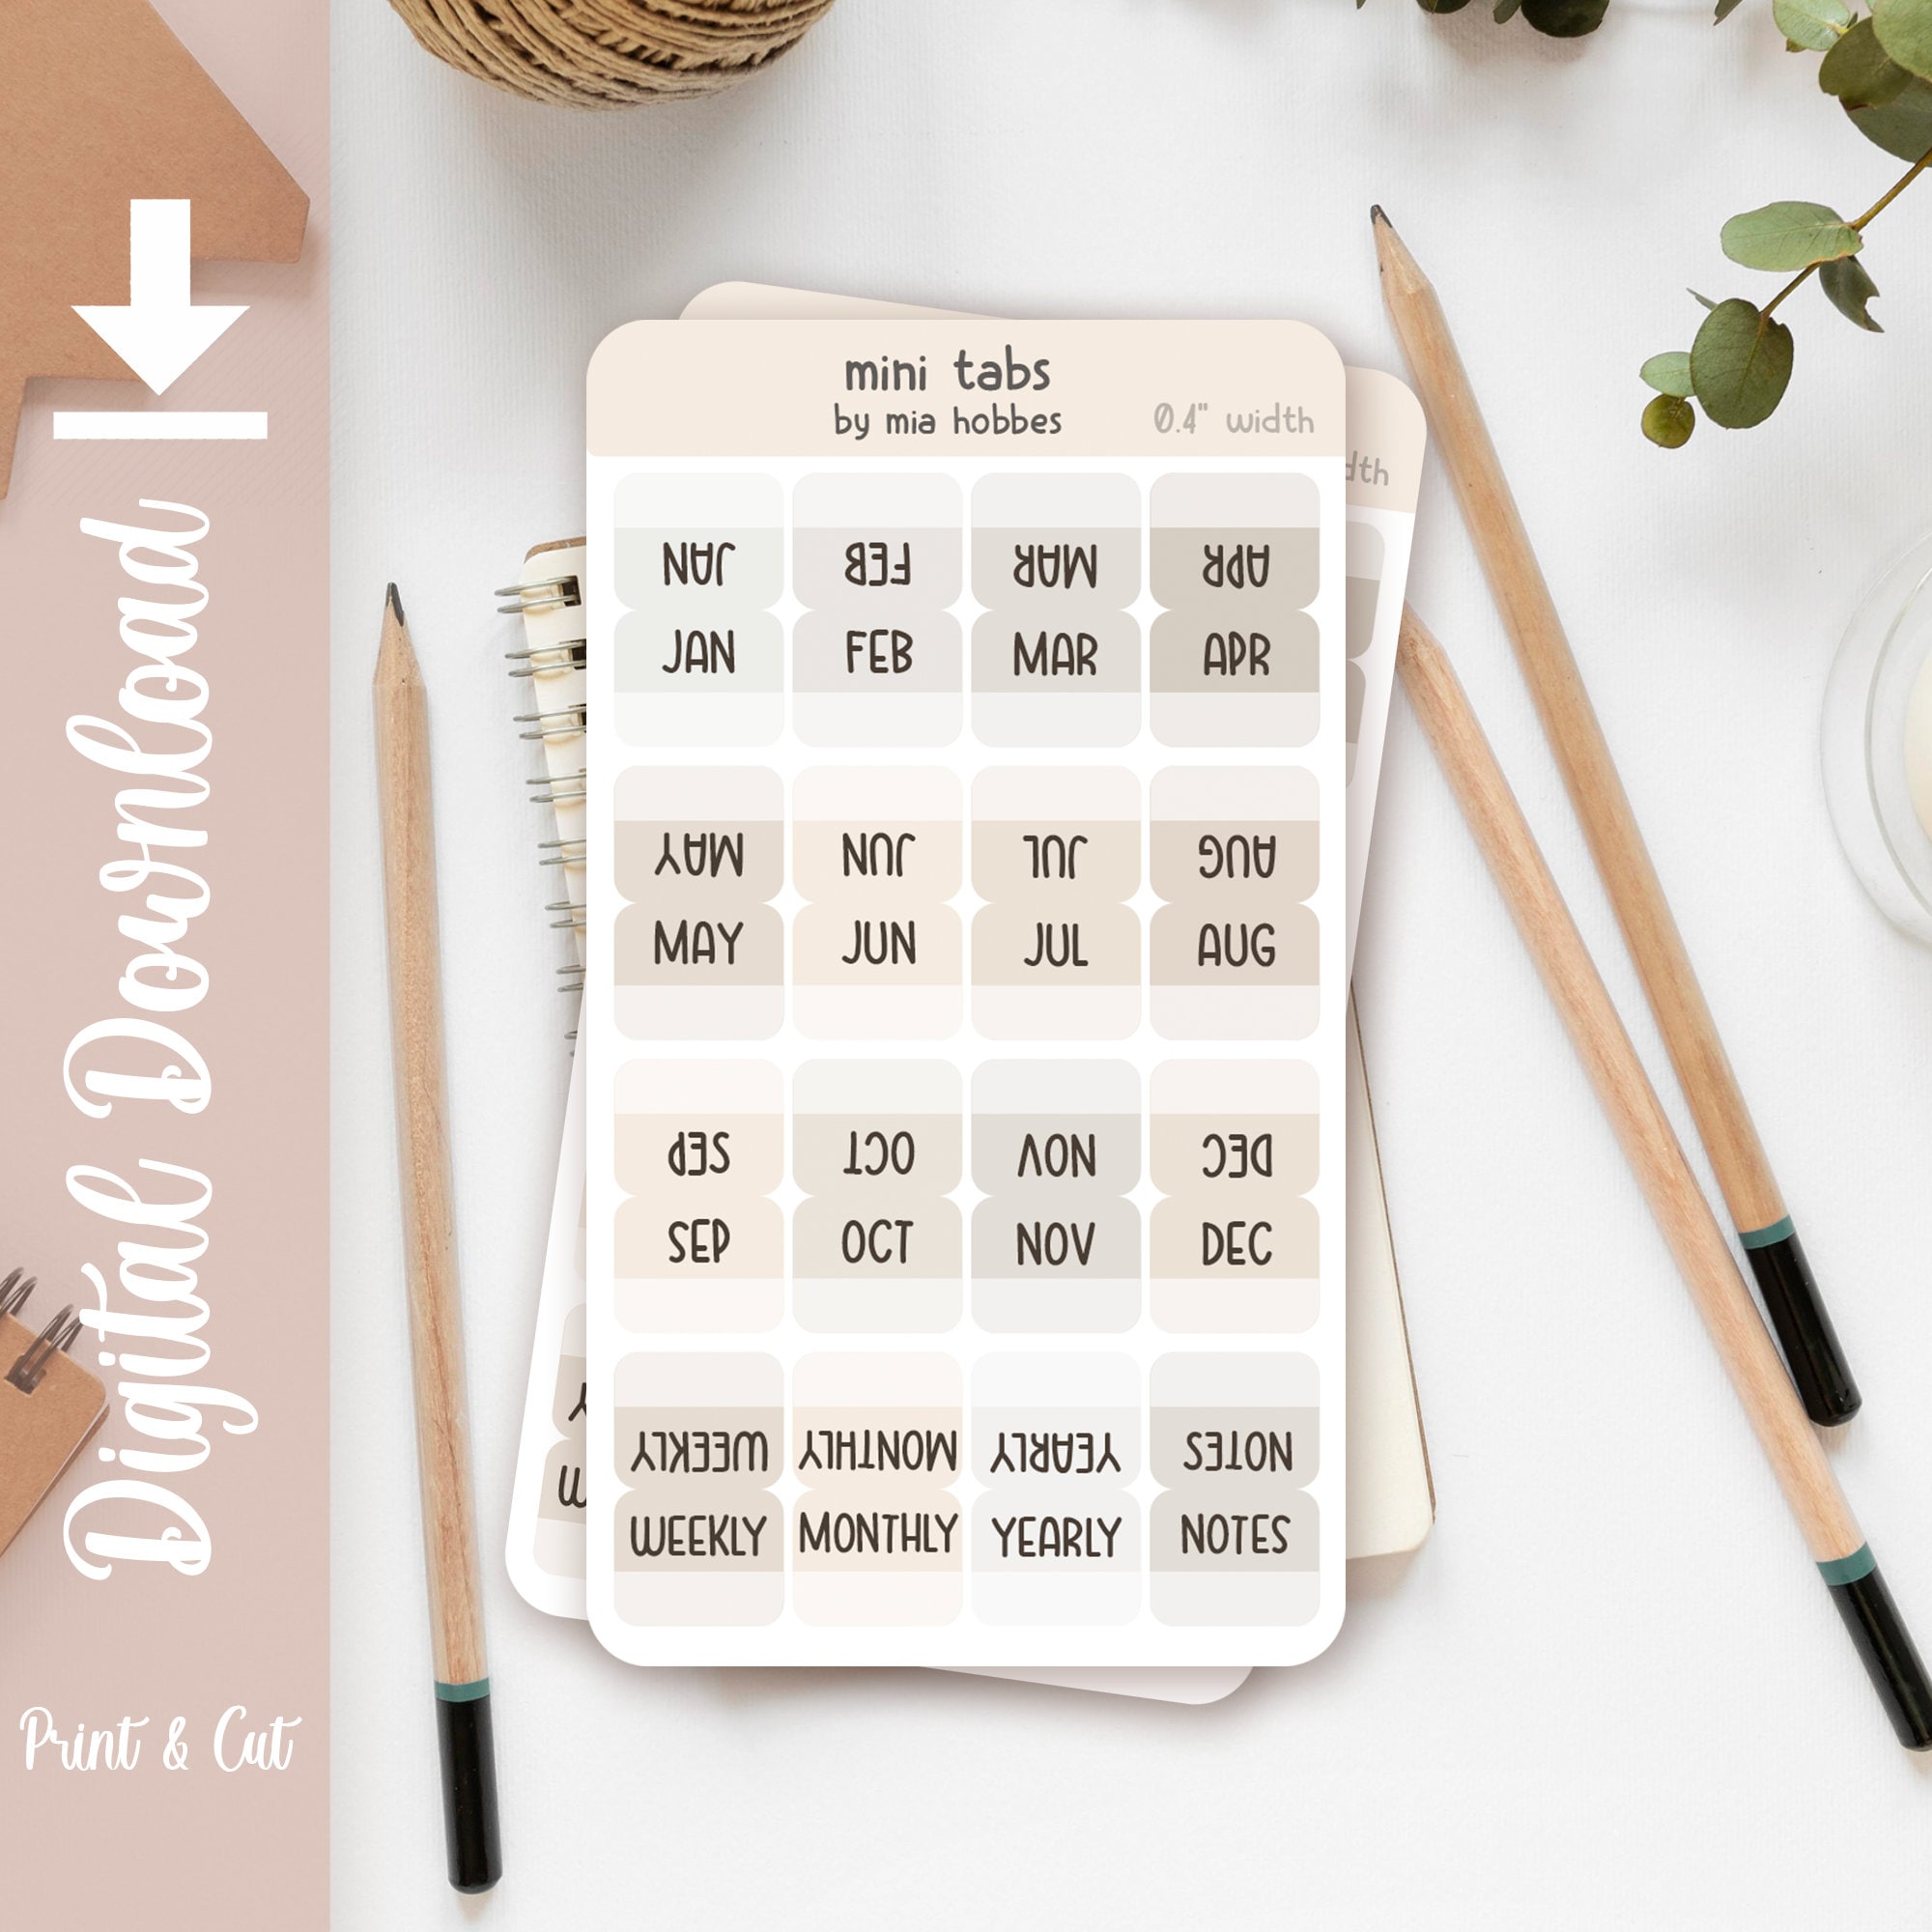 Baby It's Cold Planner Stickers, Hobonichi Cousin Monthly Sticker